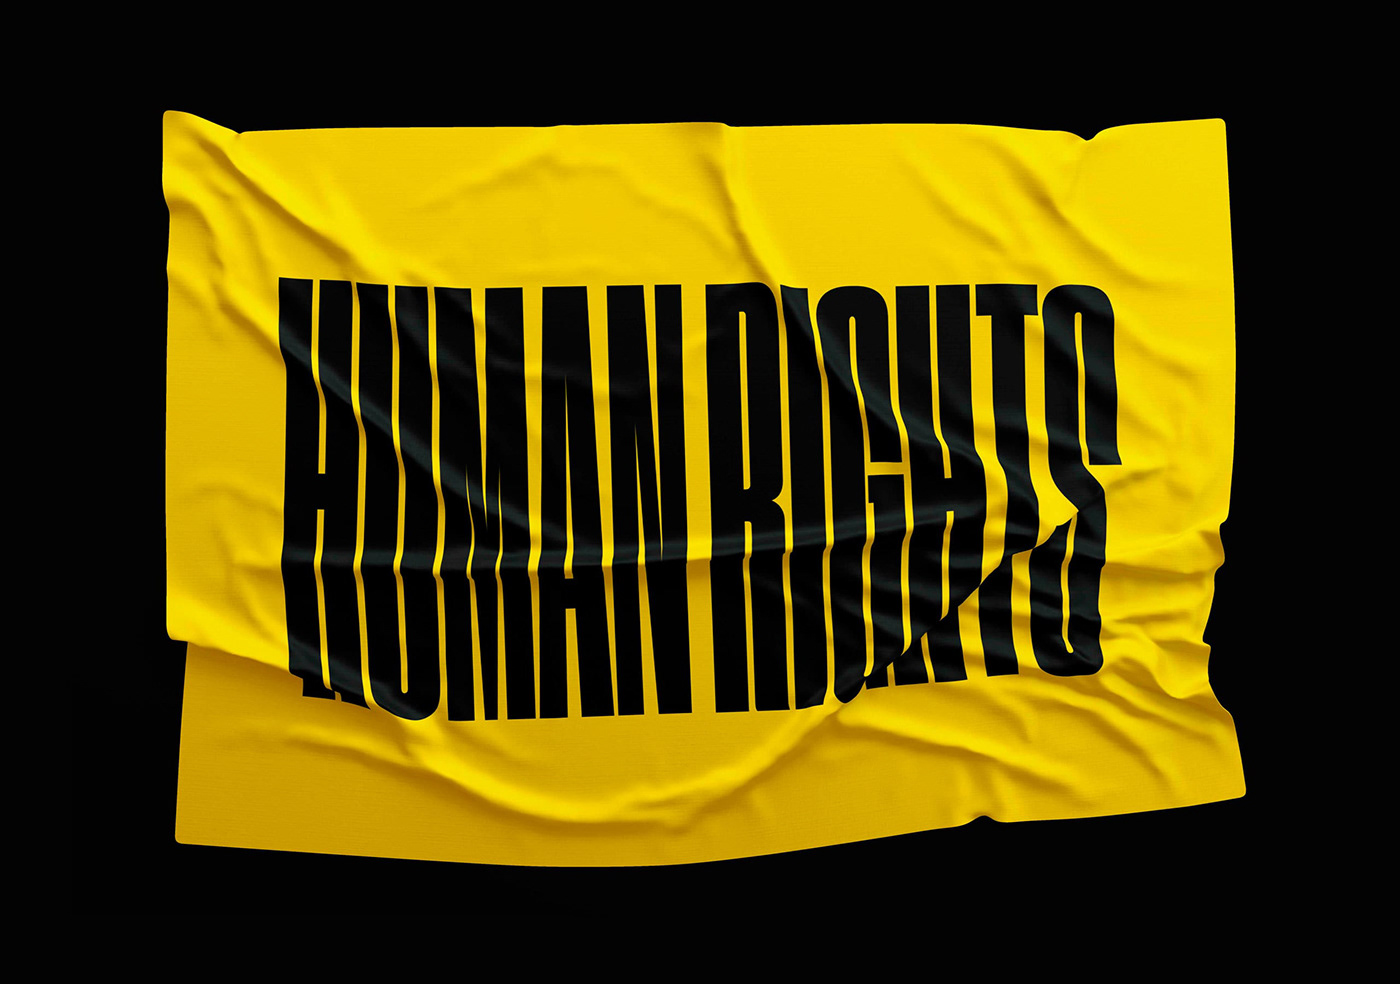 campaign bags flag humanrights condensed stickers yellow black natura